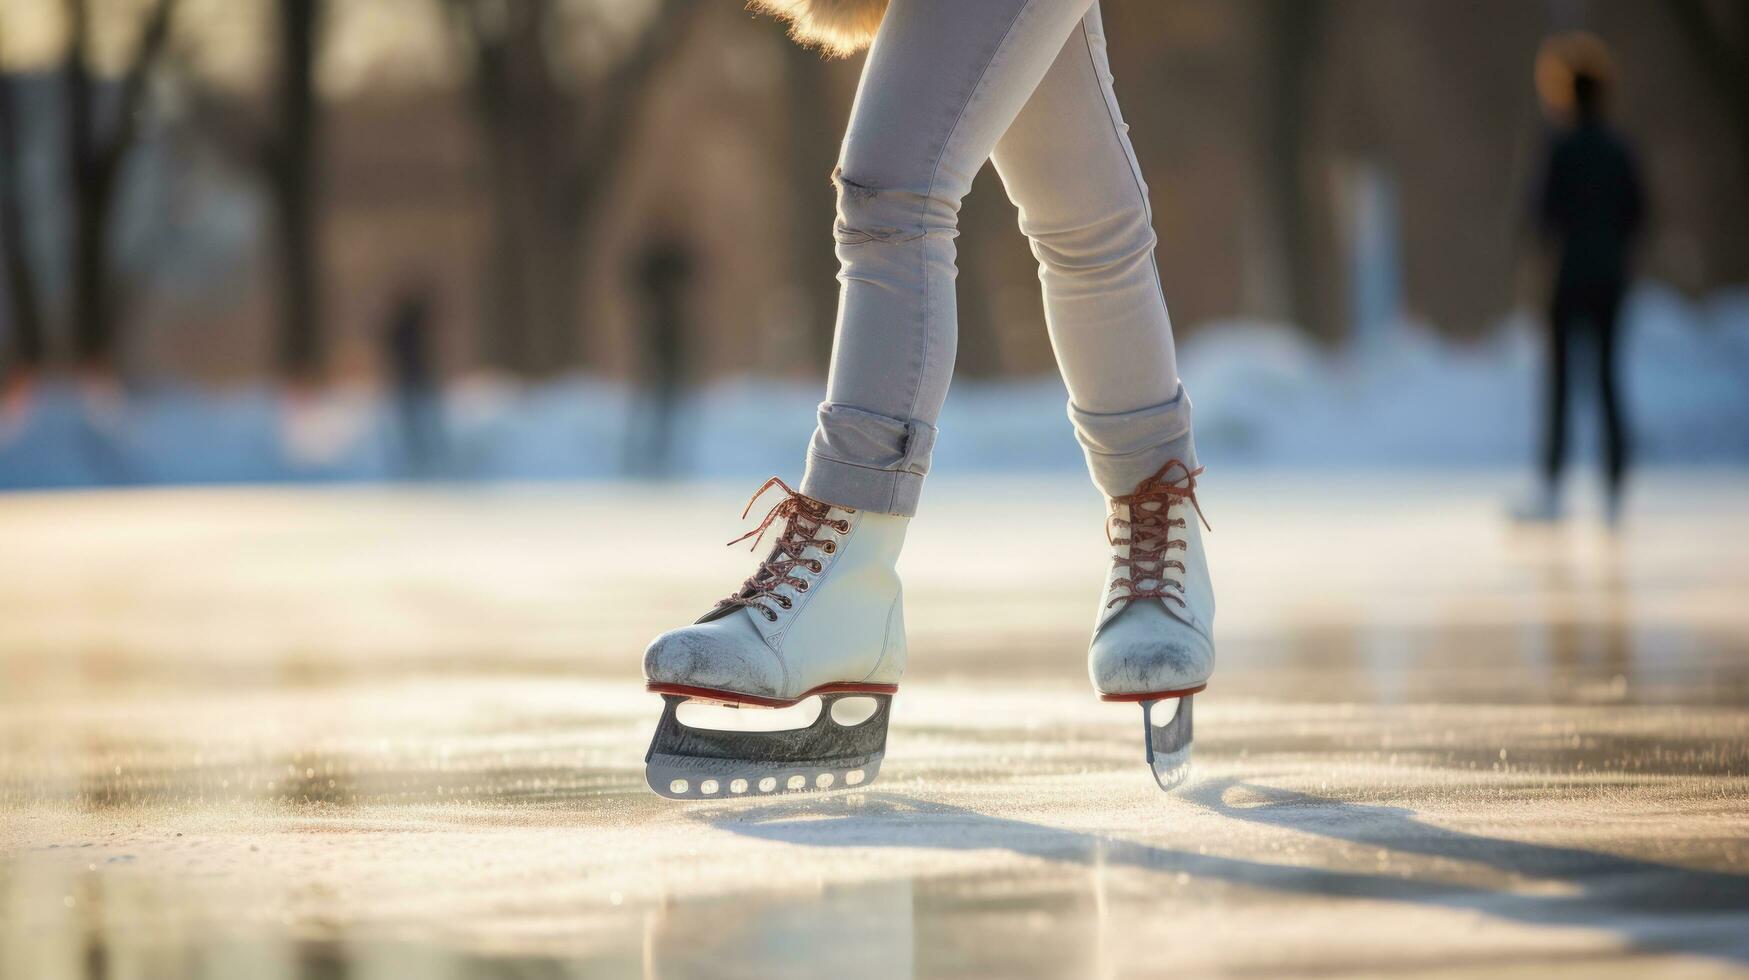 Ice Skating. Elegance and precision on icy surfaces photo